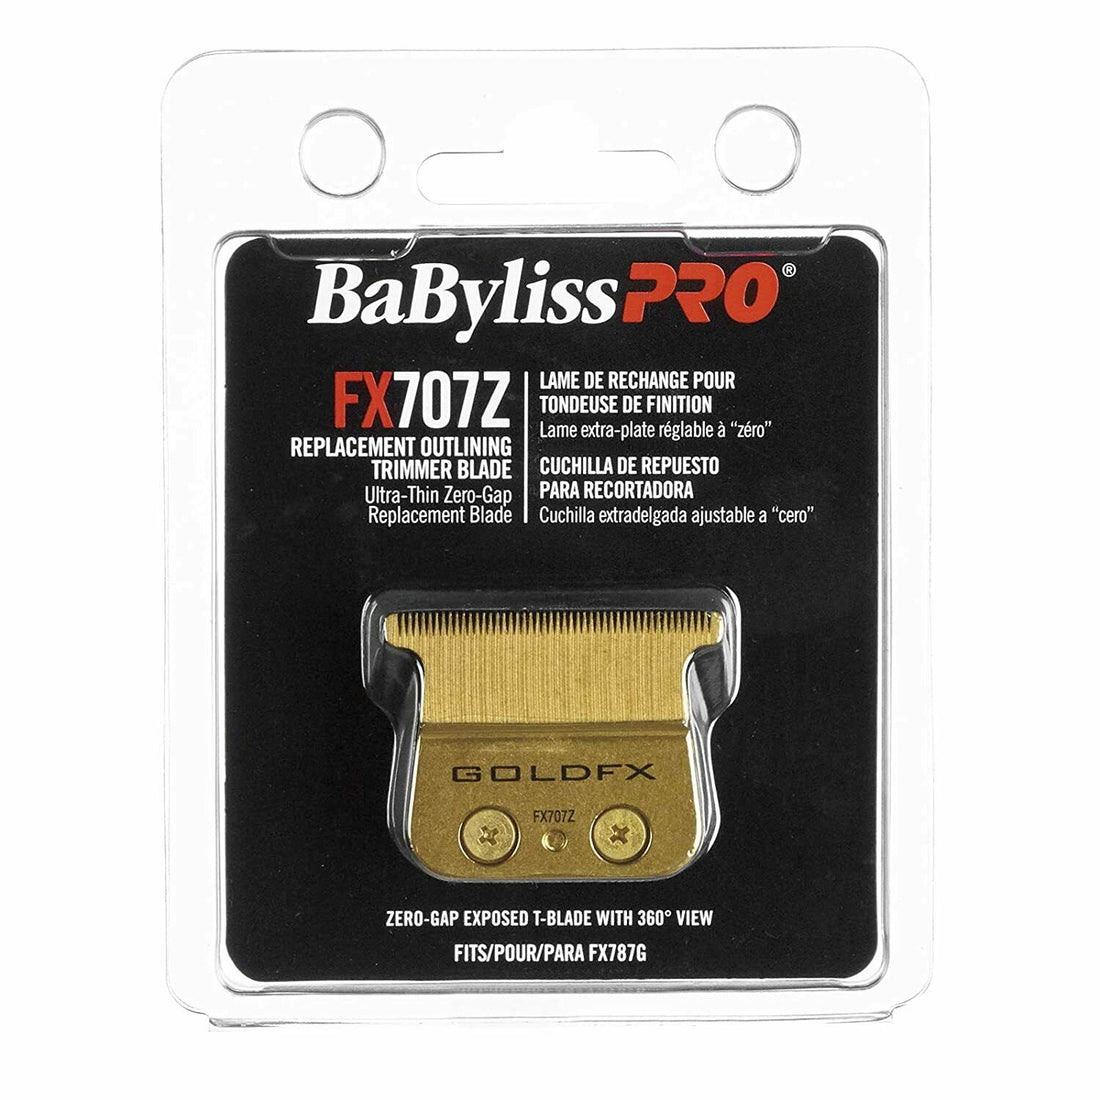 BaByliss PRO GoldFX FX707Z Replacement Blade